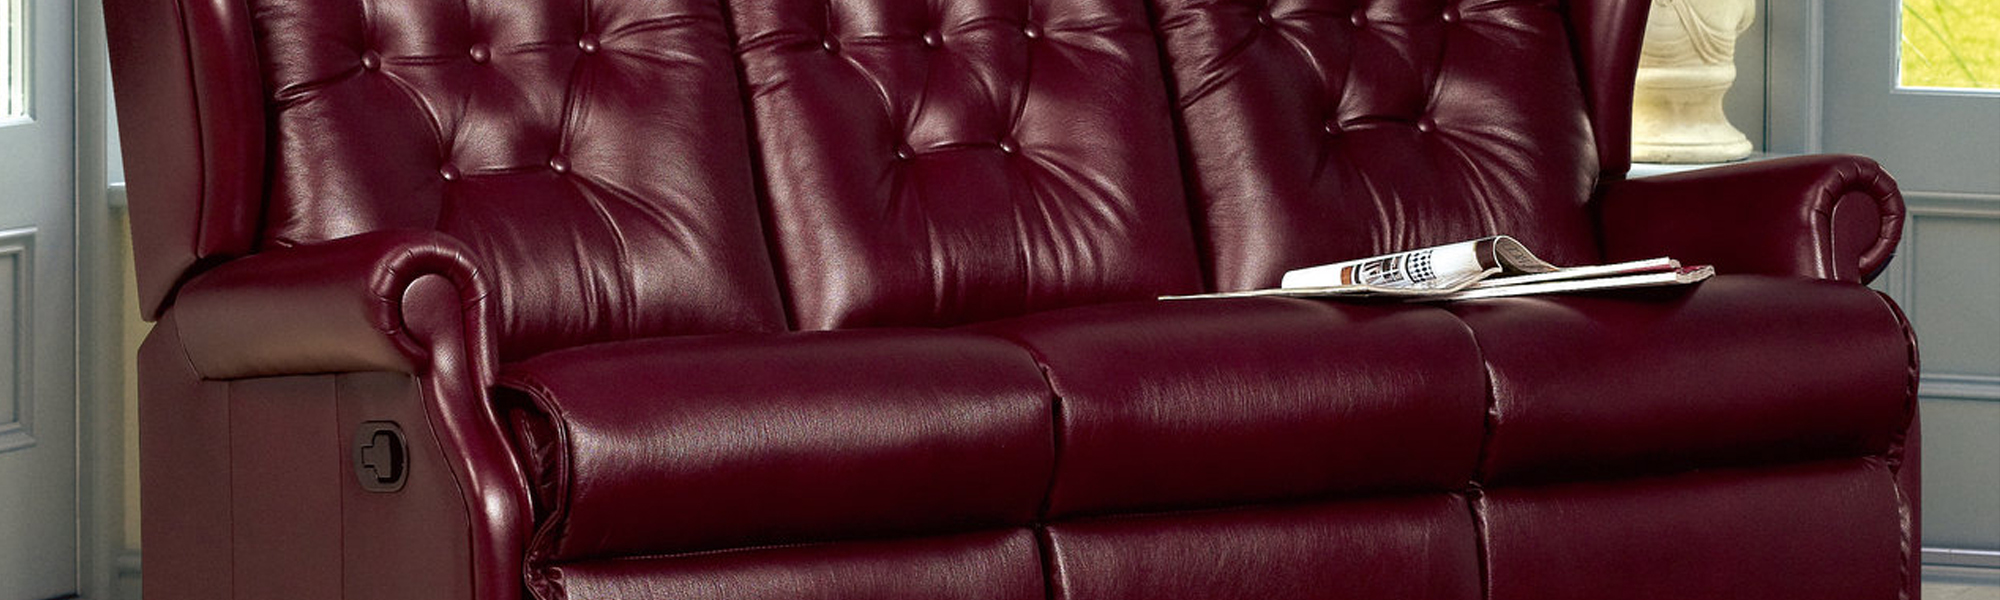 Leather 3 Seater Manual Recliner Sofas